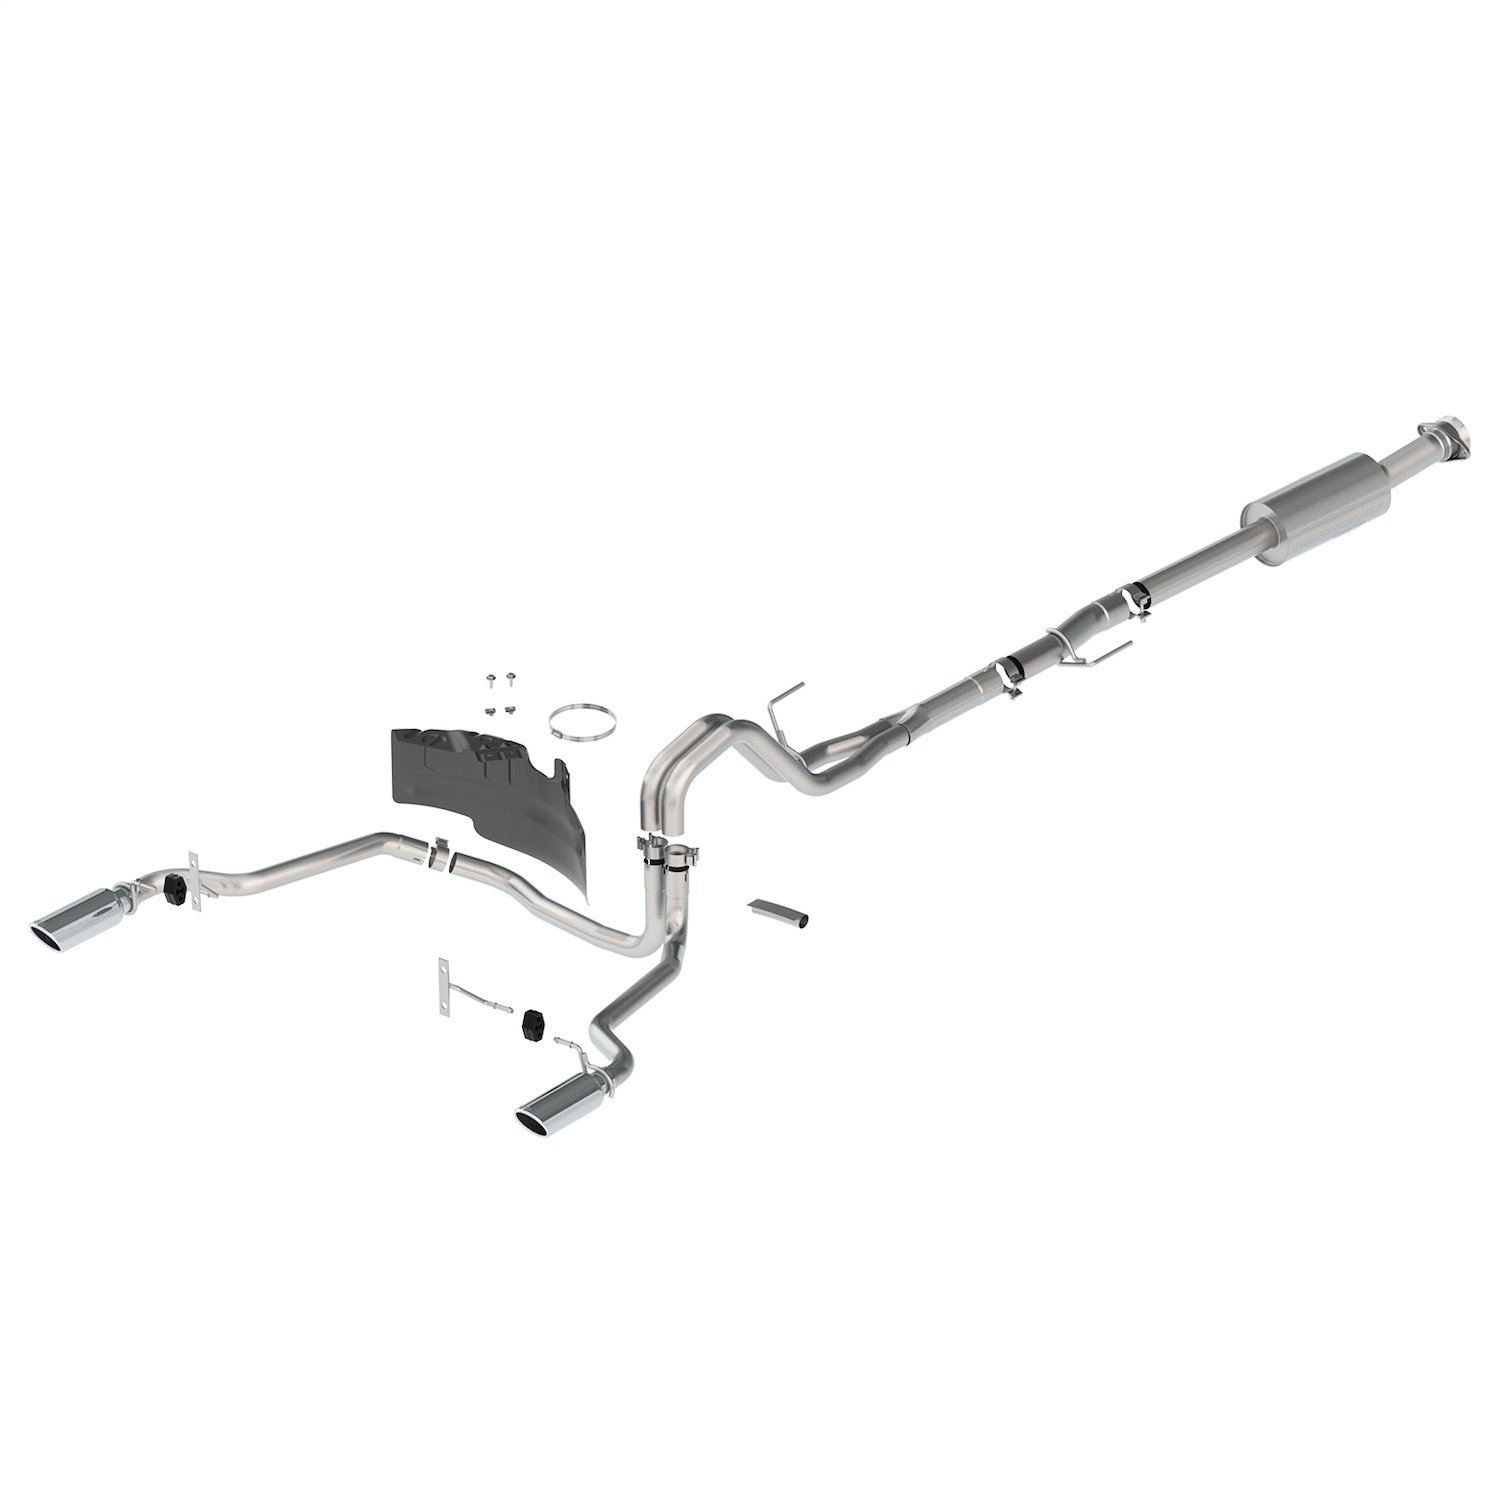 Cat-Back Extreme Exhaust System Fits Select Ford F-150 2.7L, 3.5L, 5.0L Trucks w/145, 157 in. WB [Chrome Tips]